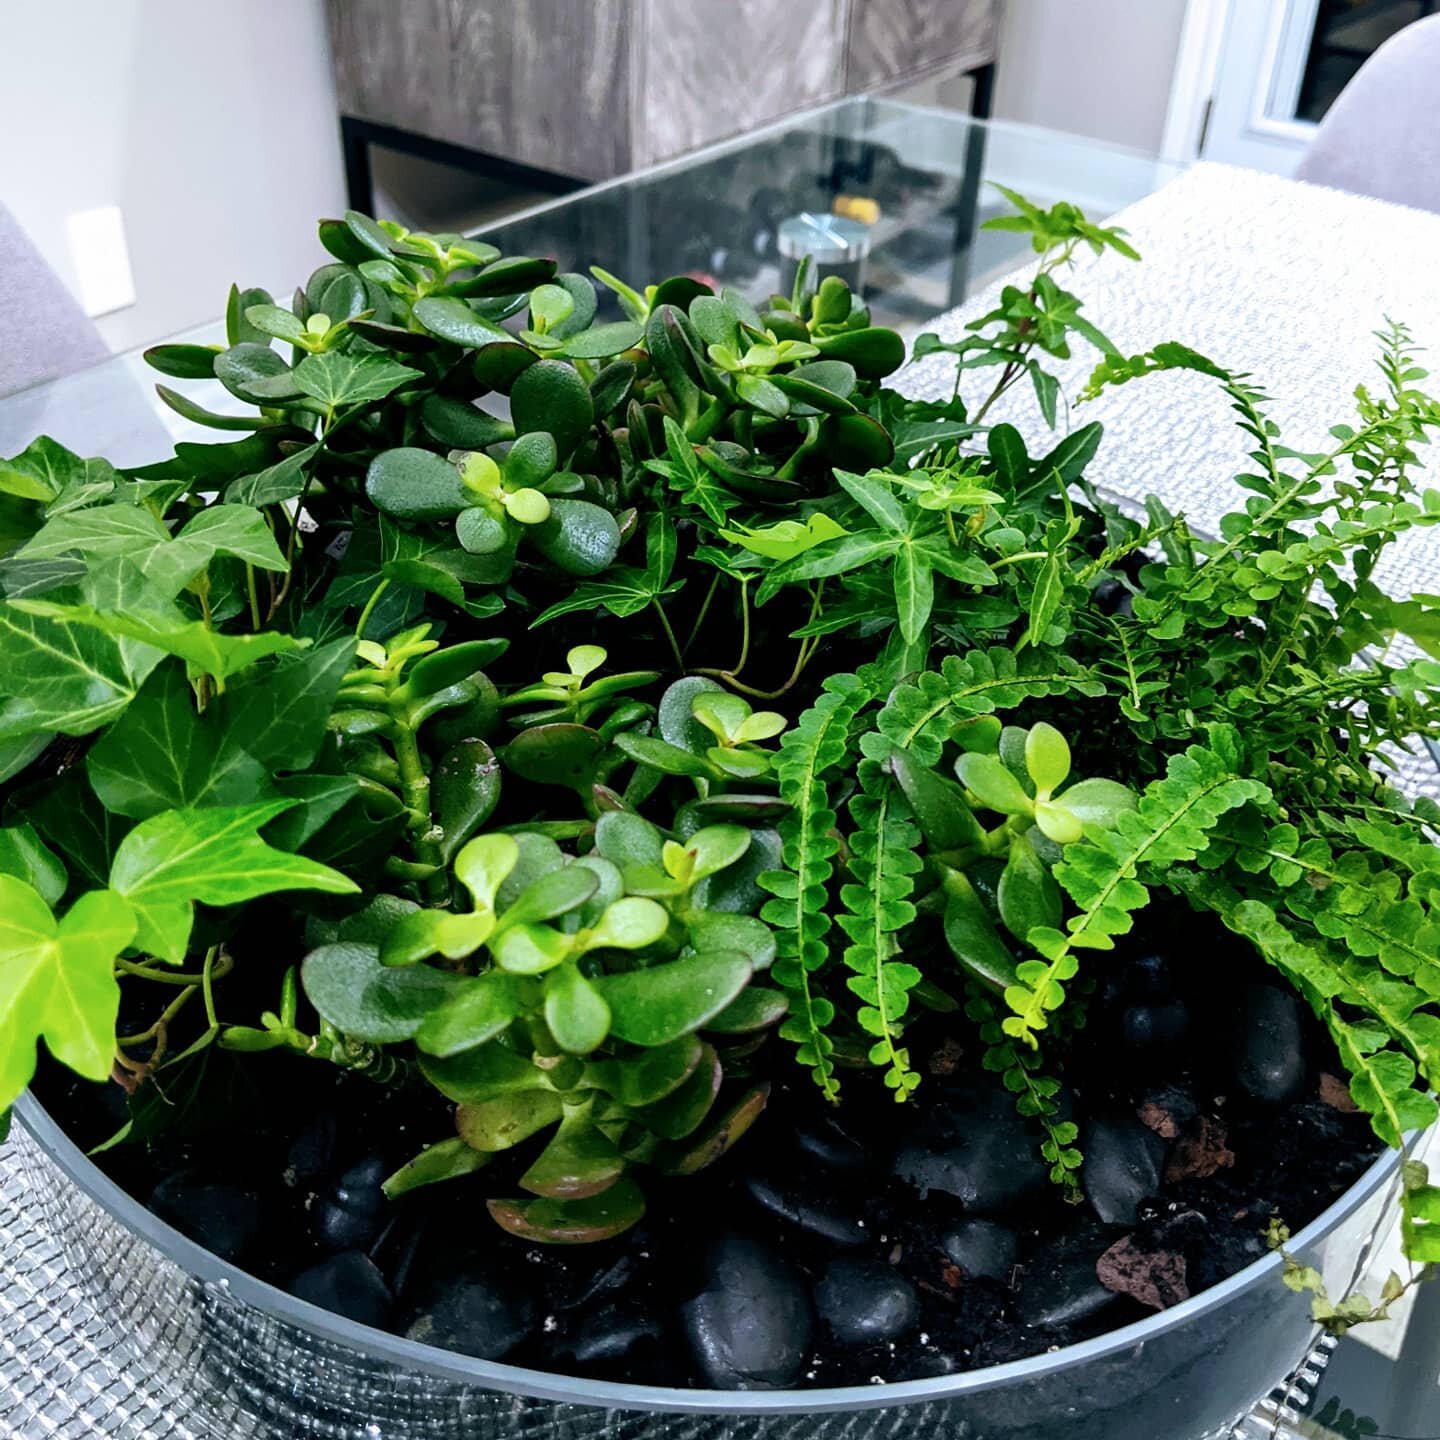 I love plants.  LOVE.  They make me happy. And on a day like Blue Monday we all deserve to be happy 

This weekend I made this bright centerpiece for my kitchen table.  It's a great way to bring some outdoor inside.

I thought I would share some grea